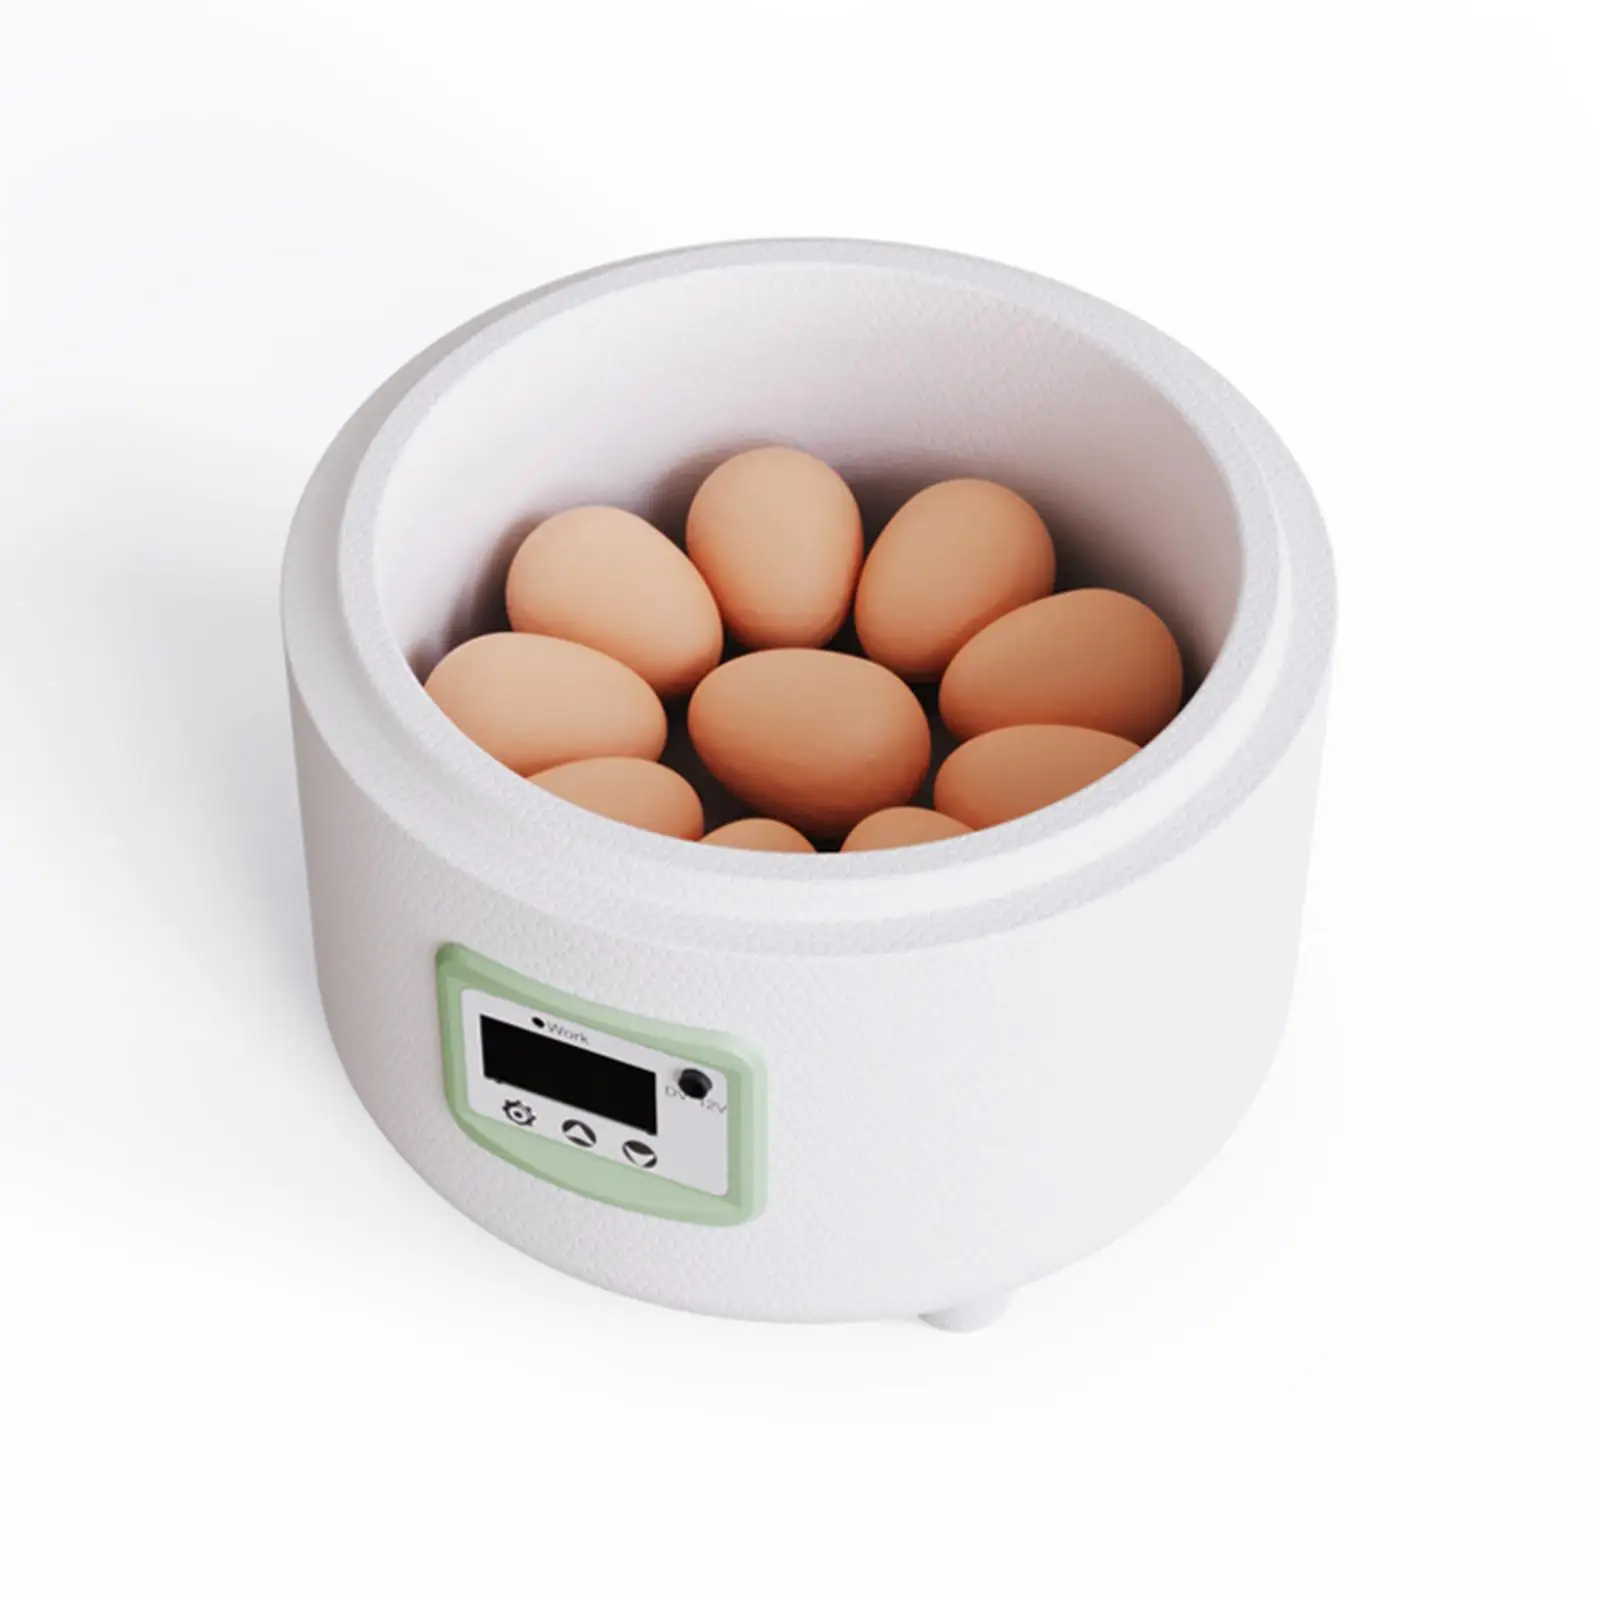 Portable Poultry Hatcher Digital Automatic Egg Incubator for Hatching Bird